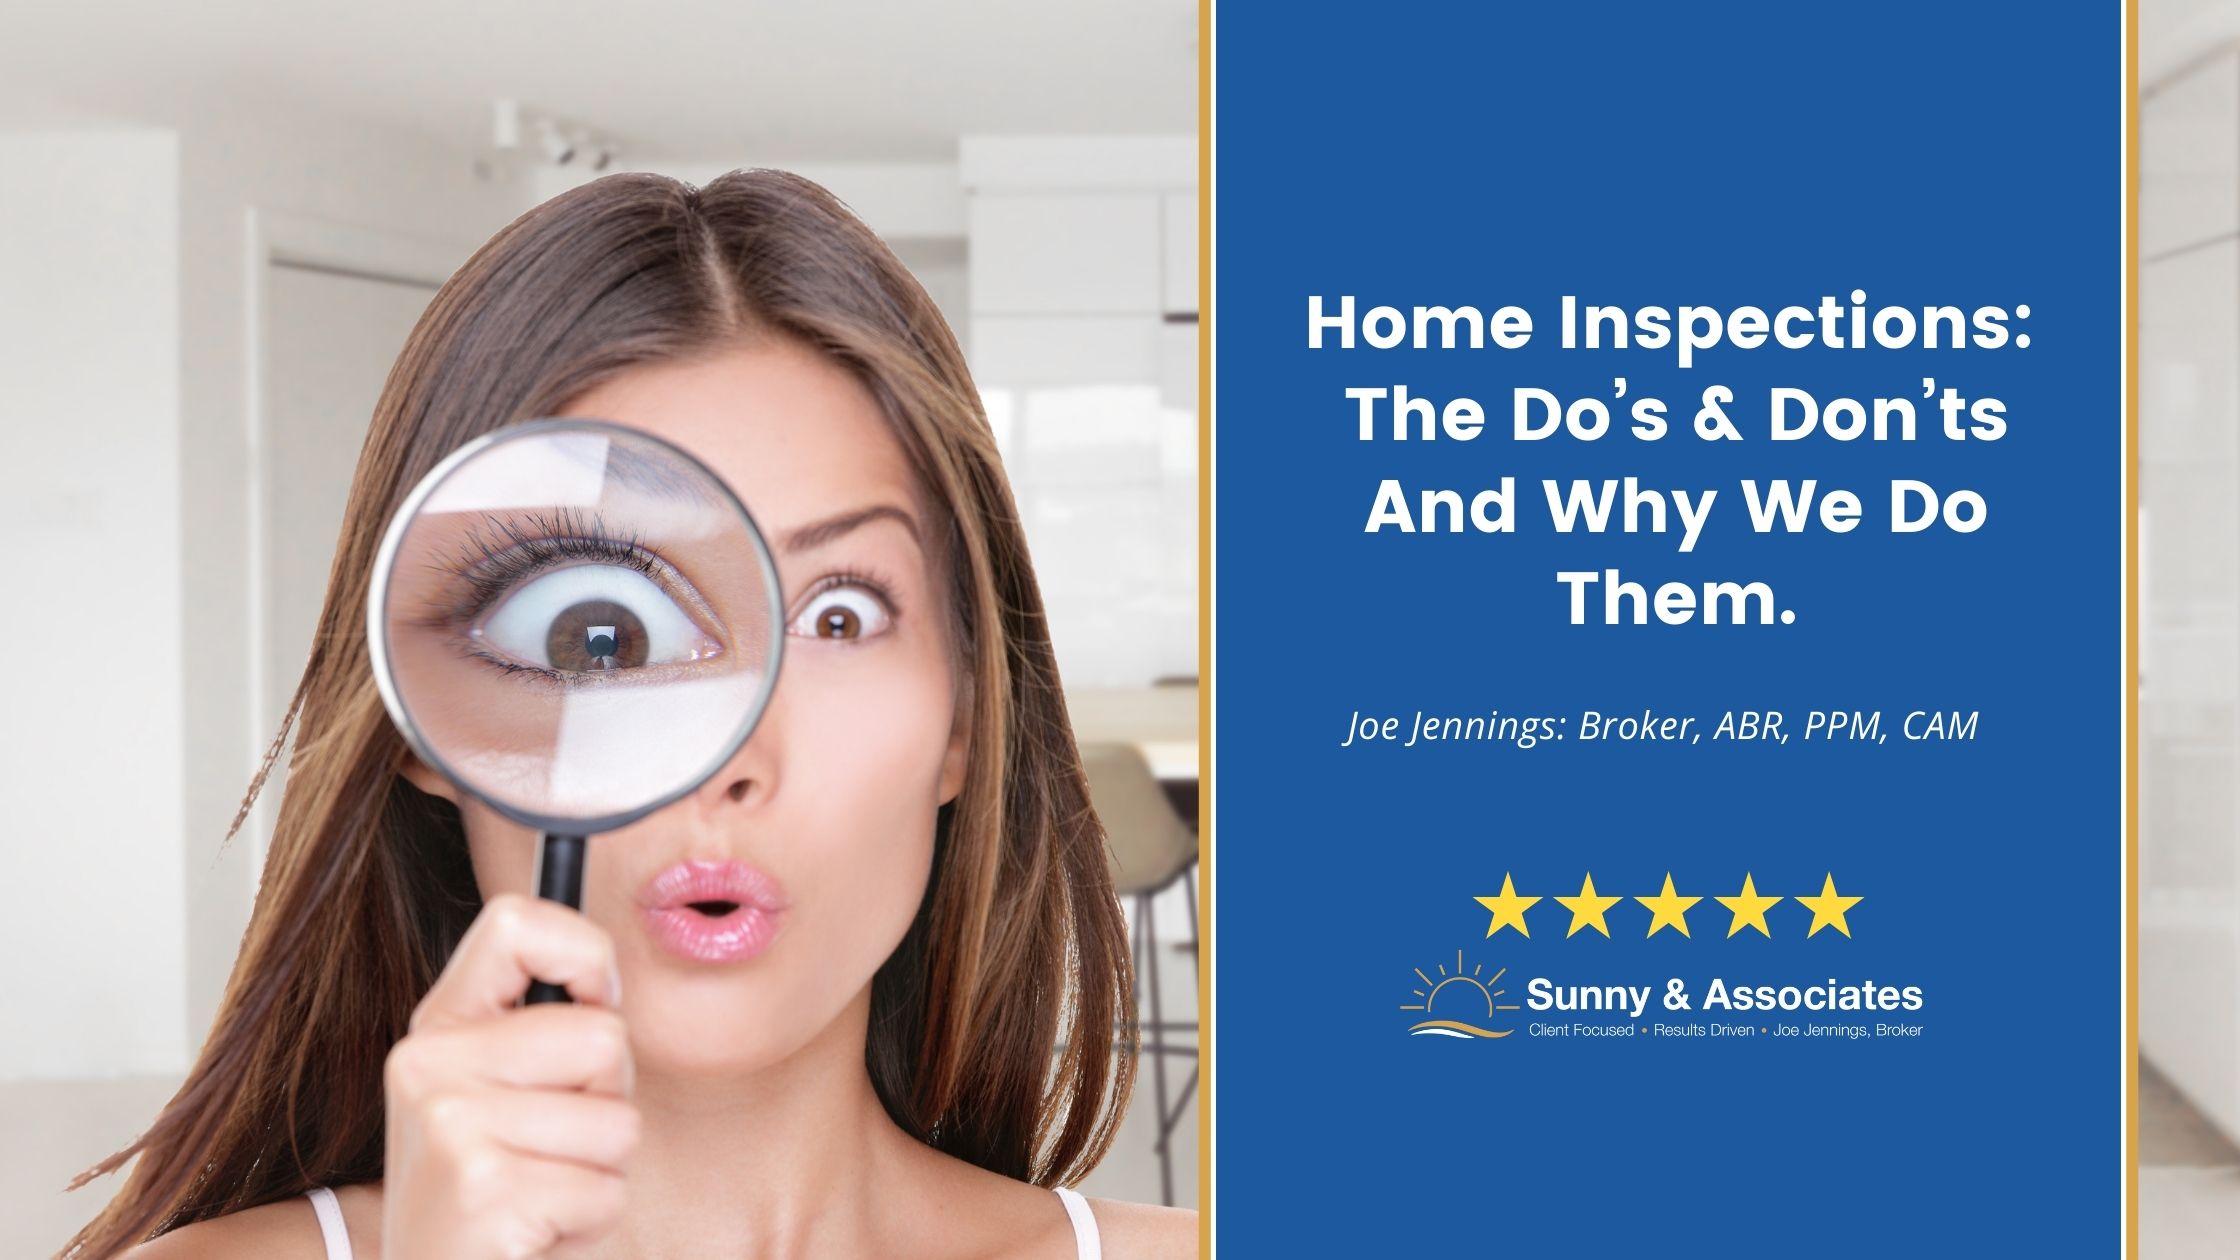 home-inspections-the-dos-and-donts-and-why-we-do-them-2022